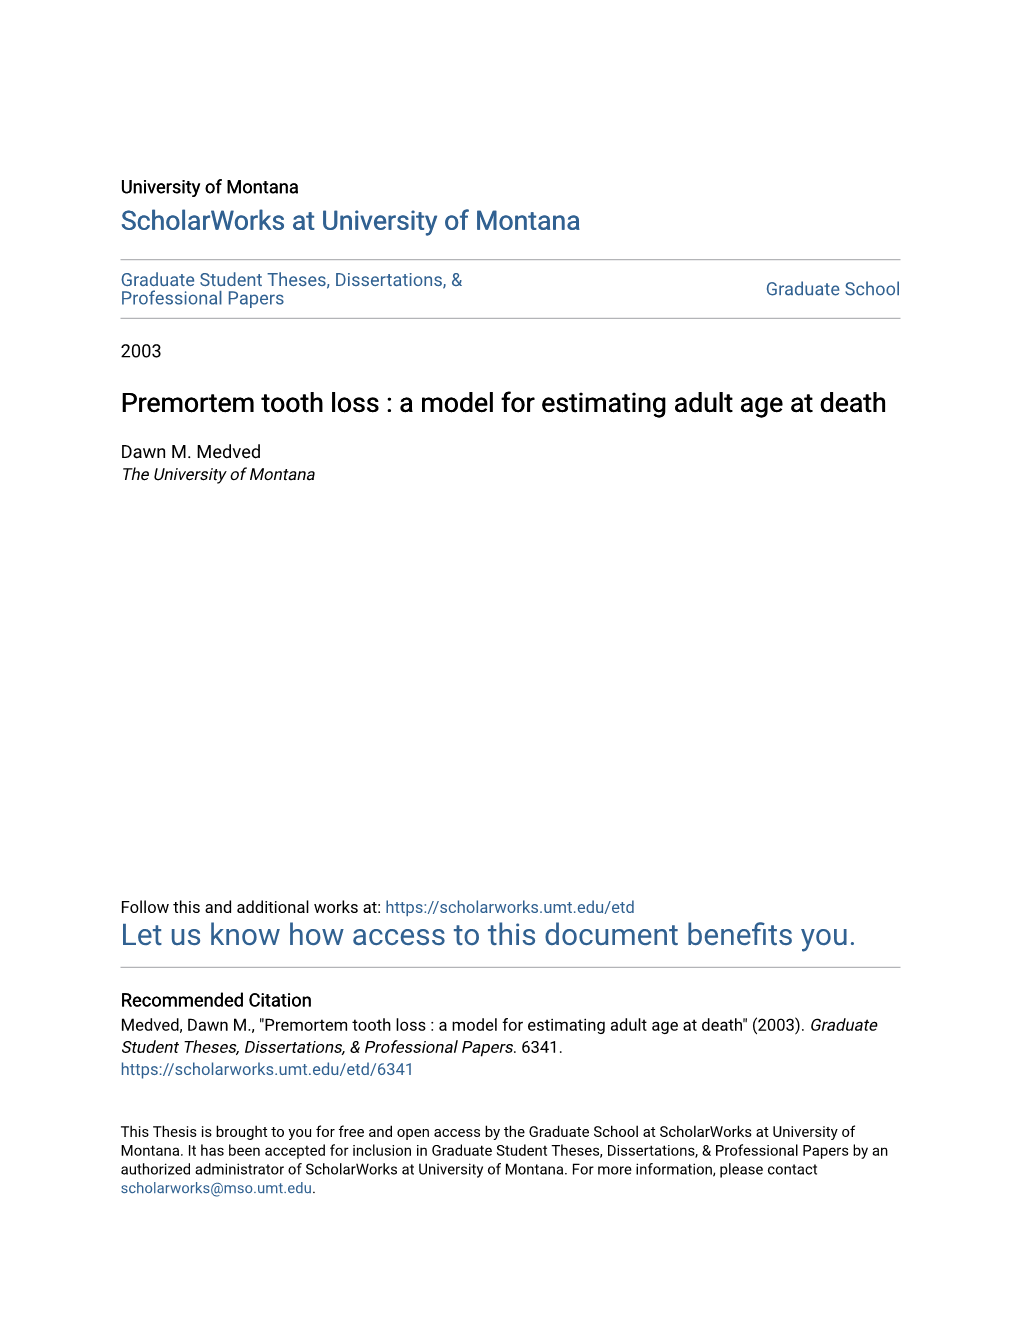 Premortem Tooth Loss : a Model for Estimating Adult Age at Death